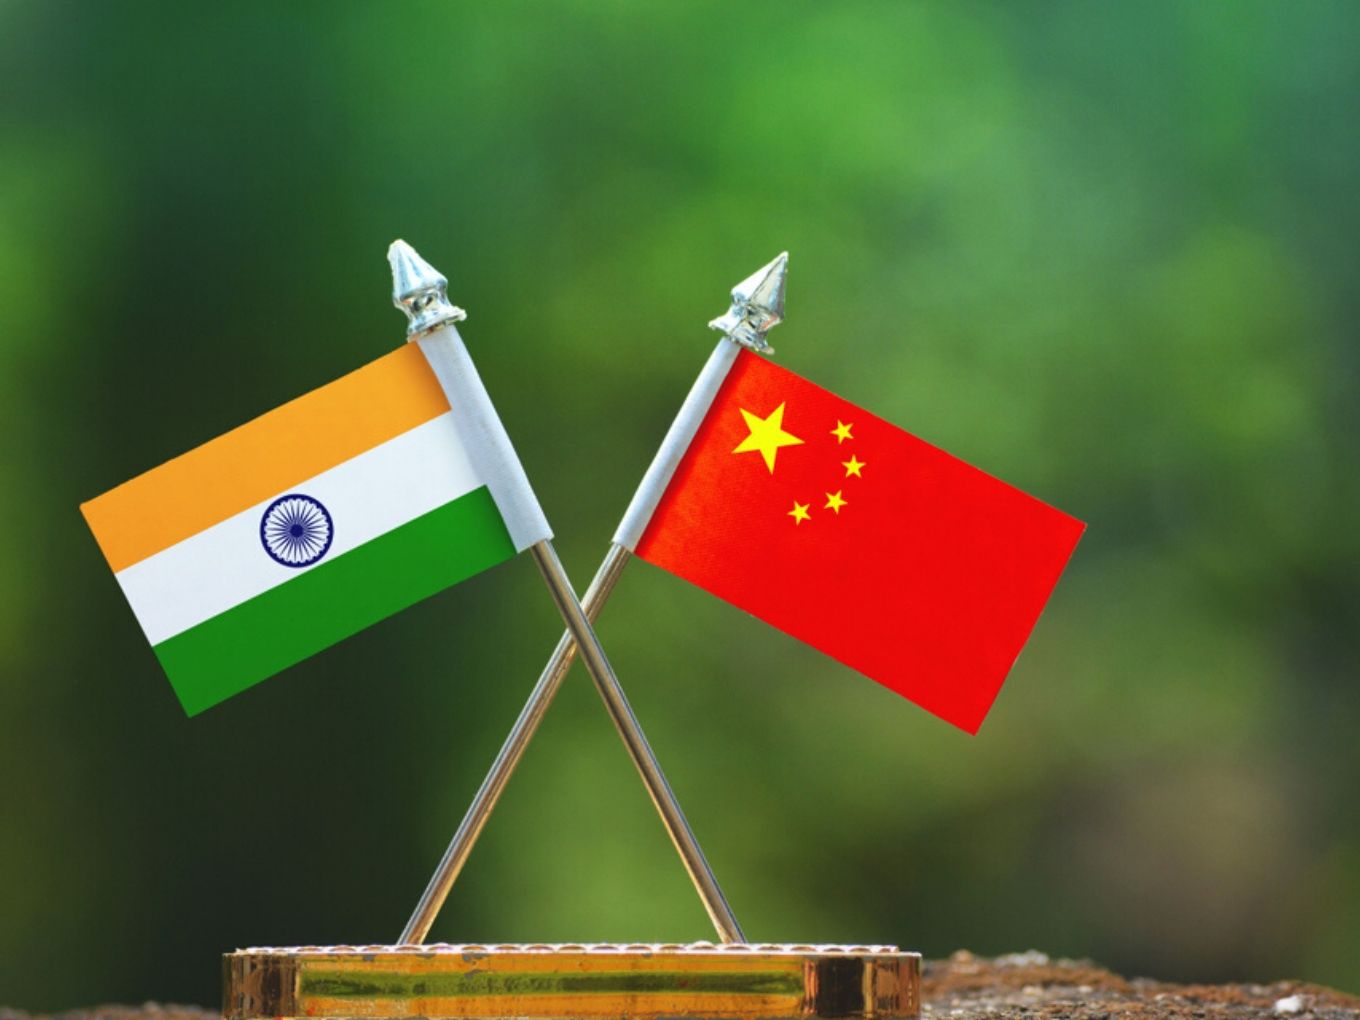 China Cries Foul, Seeks Review Of India’s ‘Discriminatory’ FDI Guidelines